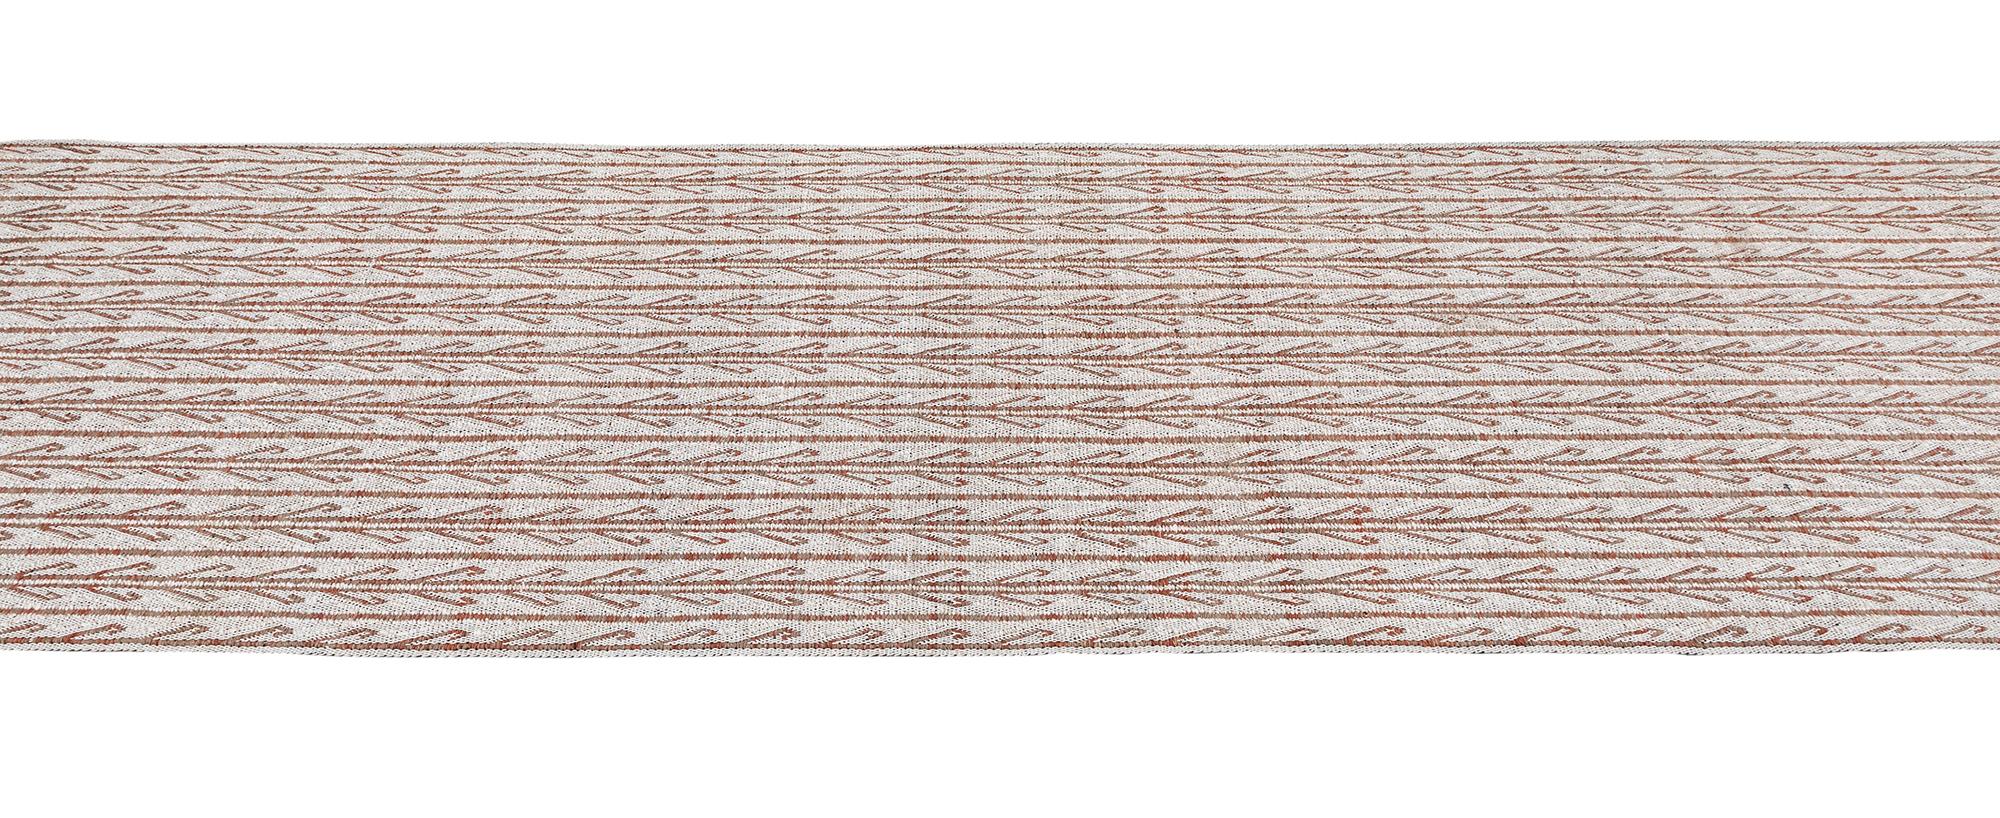 Contemporary Ricci Tribal Flatweave Runner Rug For Sale